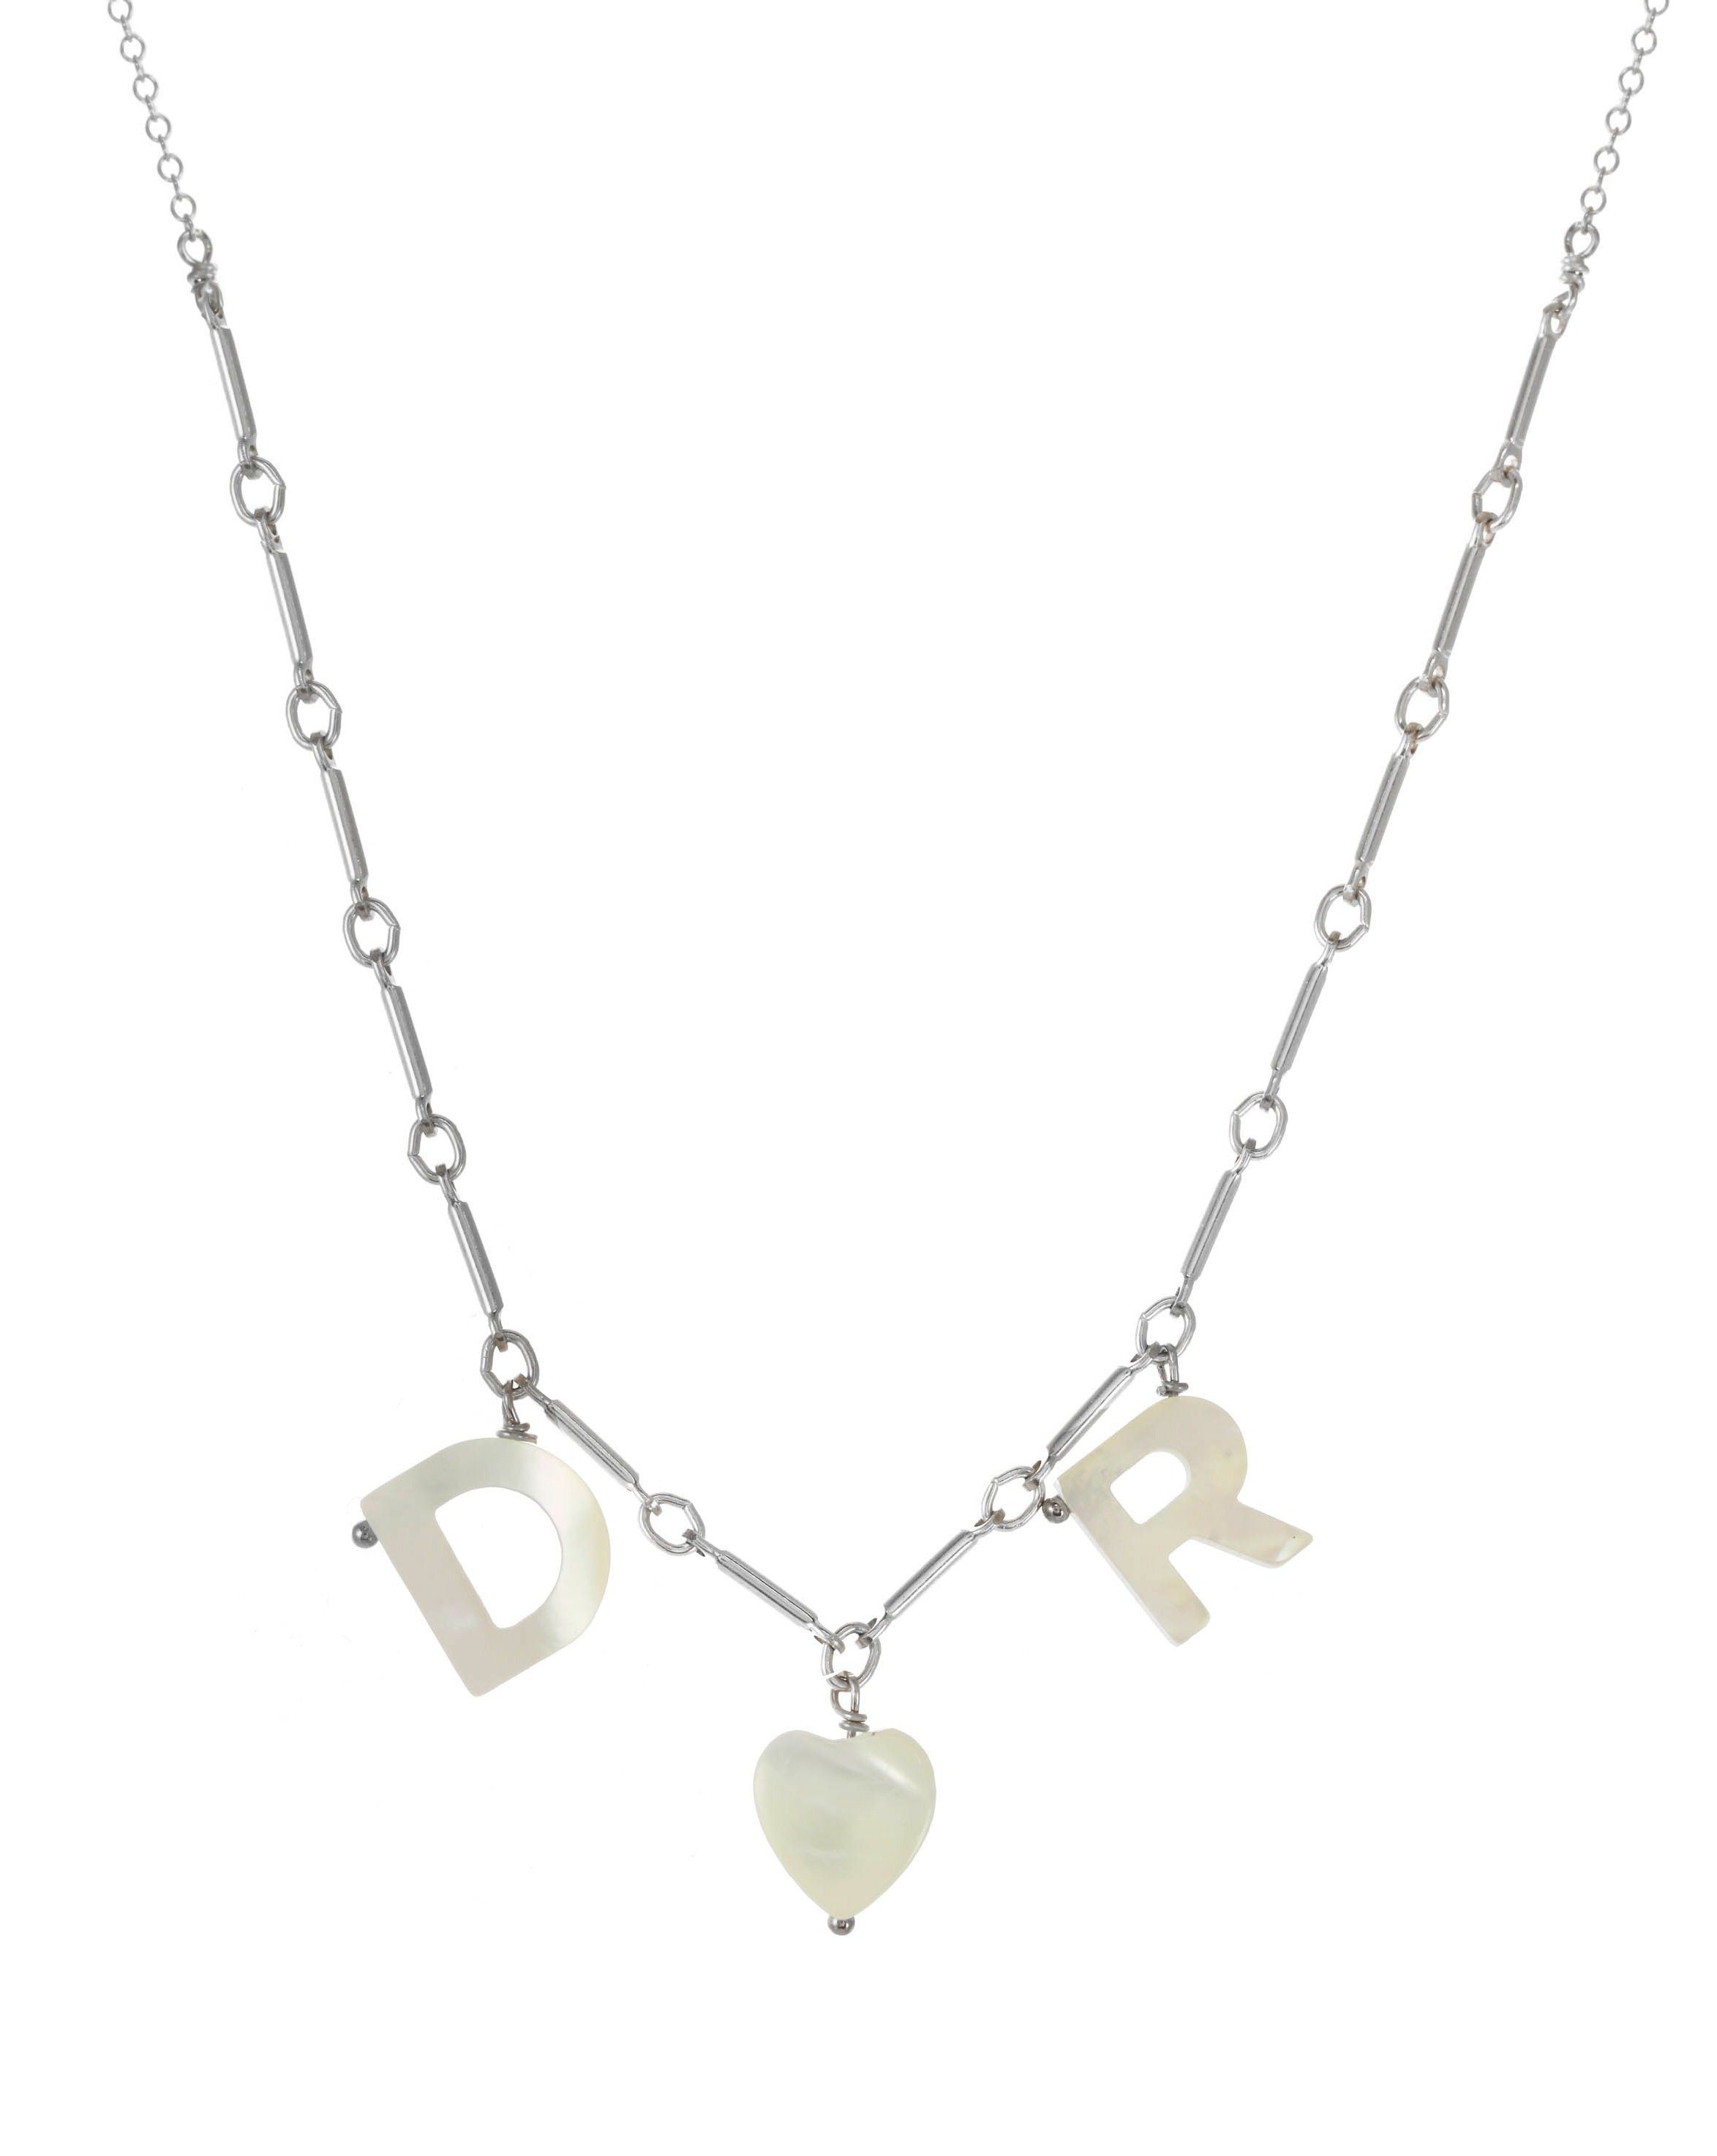 Love Necklace by KOZAKH. A 16 to 18 inch adjustable length necklace with linked bar chain on bottom half and flat link chain on top half, crafted in Sterling Silver, featuring a customizable word made from hand carved Mother of Pearl letters.